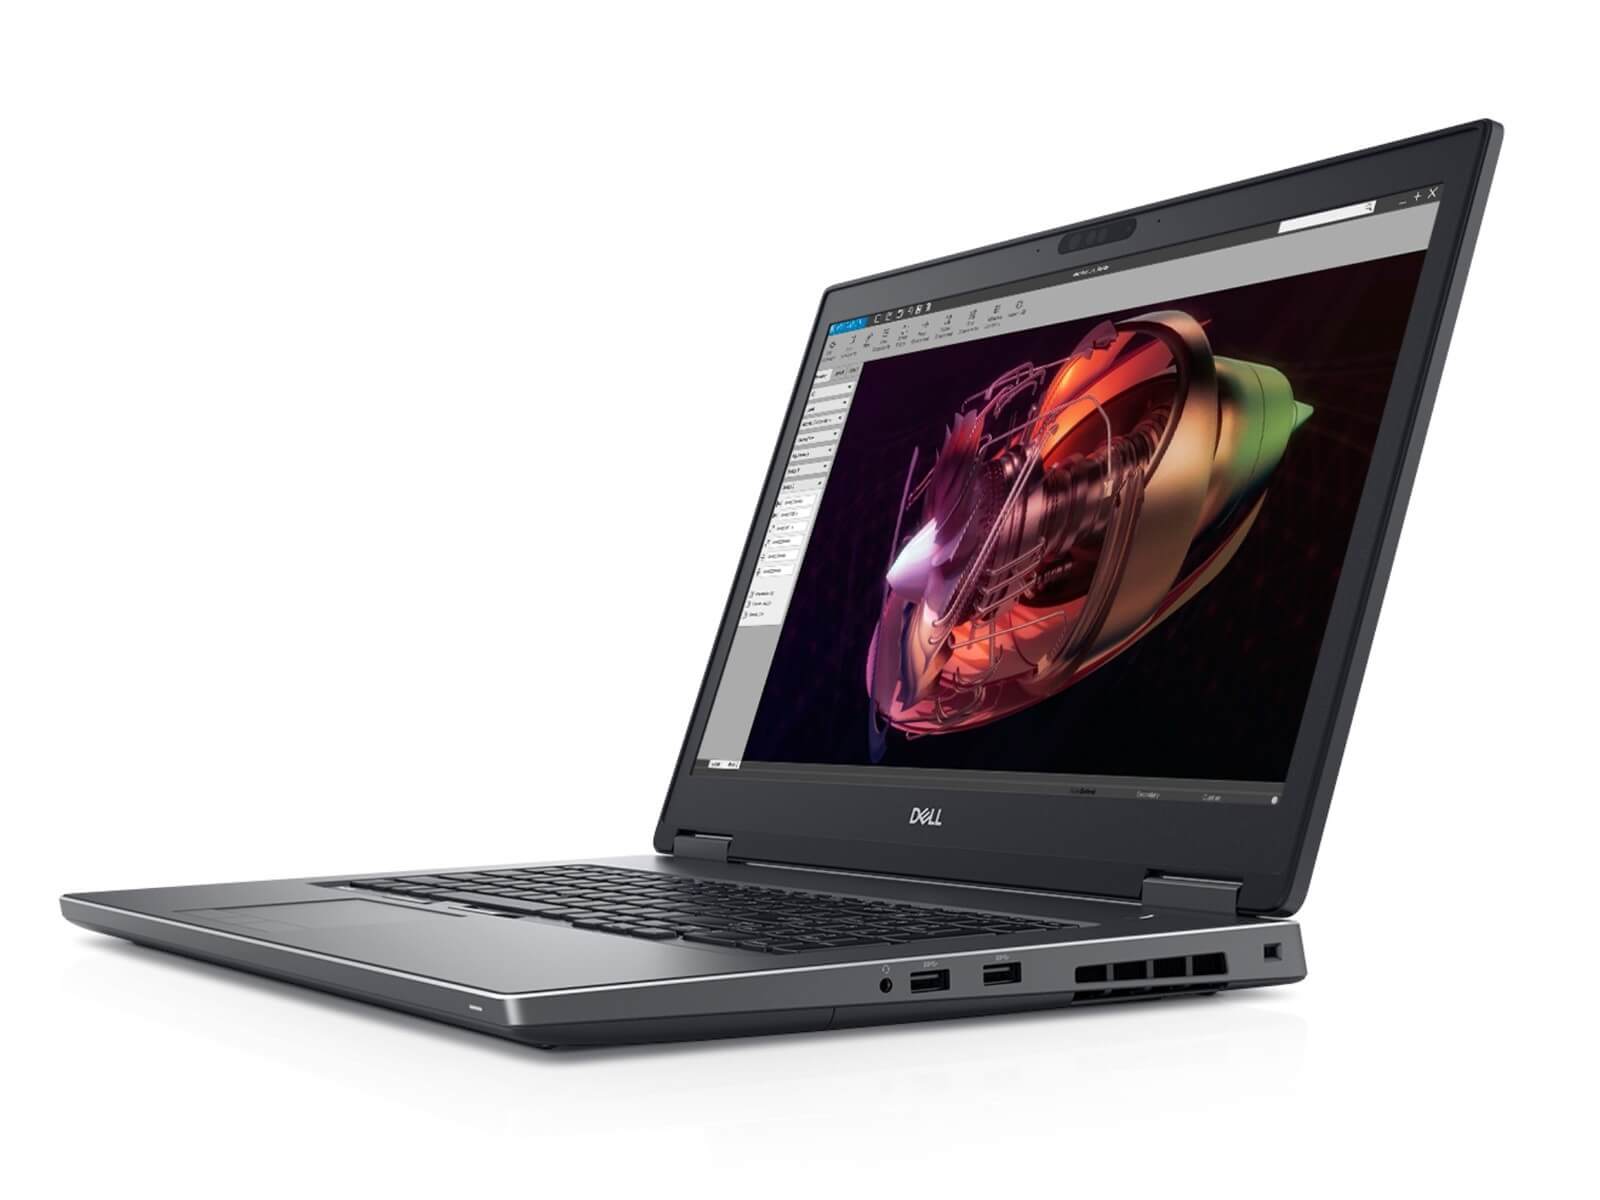 Dell Precision 7730 and 7530 are the world's most powerful VR laptops